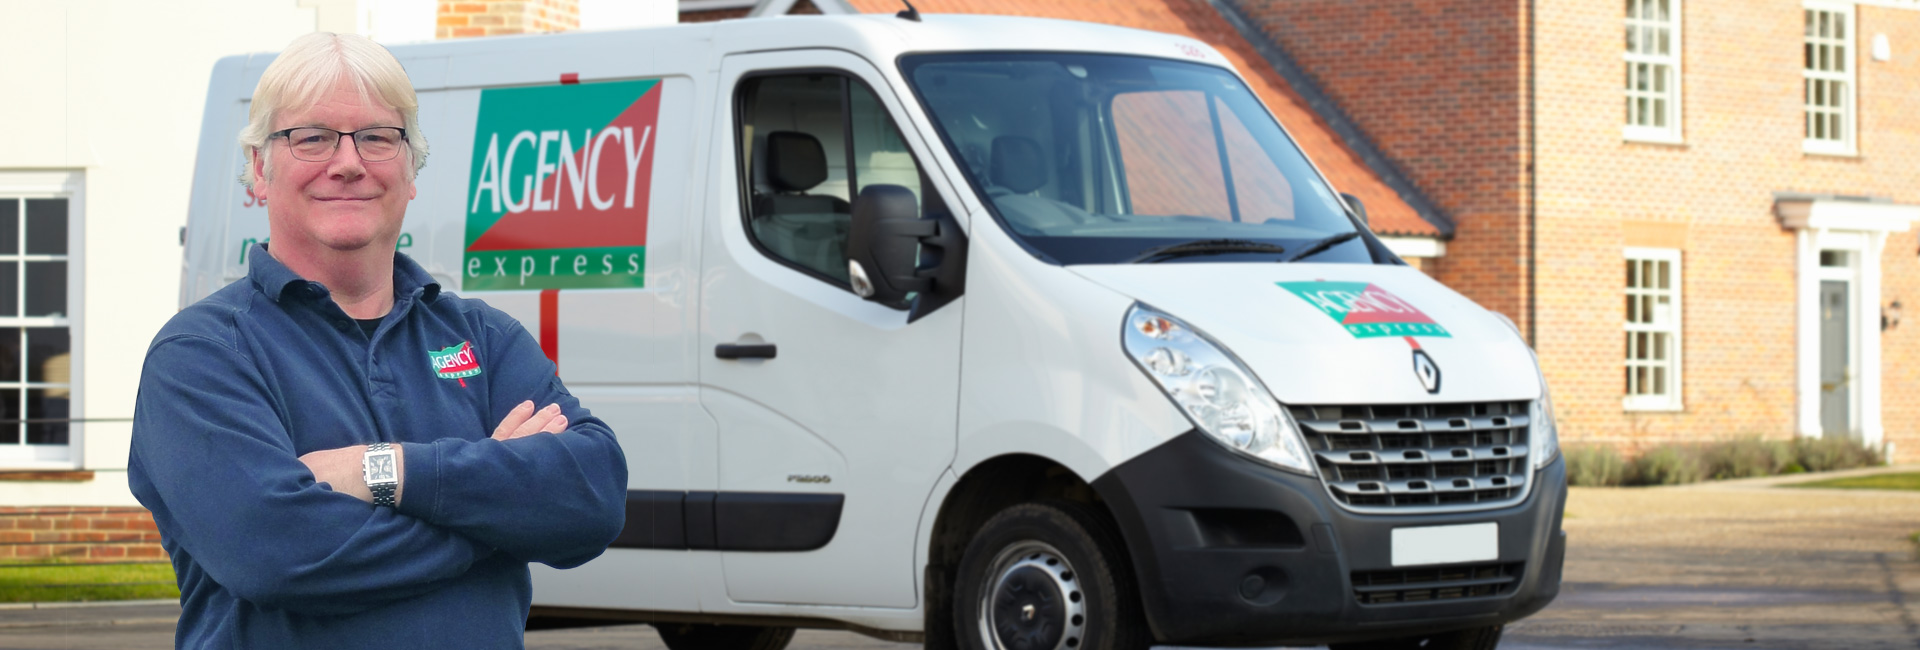 Agency Express franchise case study. Franchisee James Tipton with van.